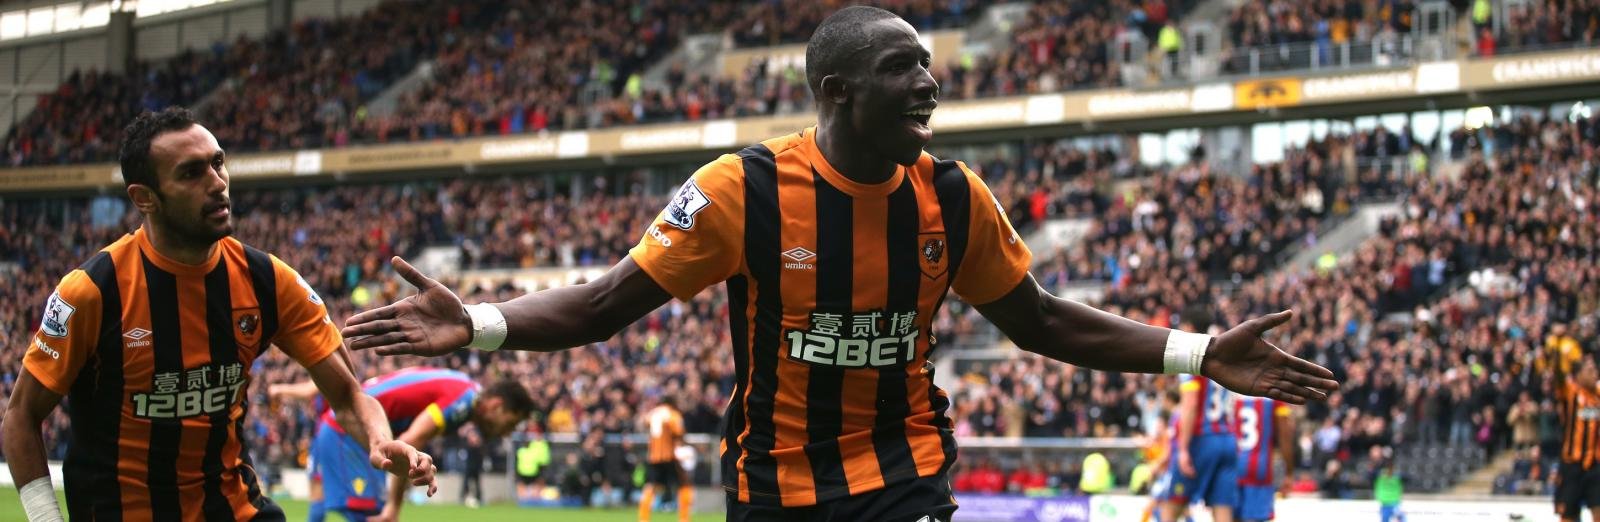 Newcastle United set to sign Hull City midfielder in £4.5m deal